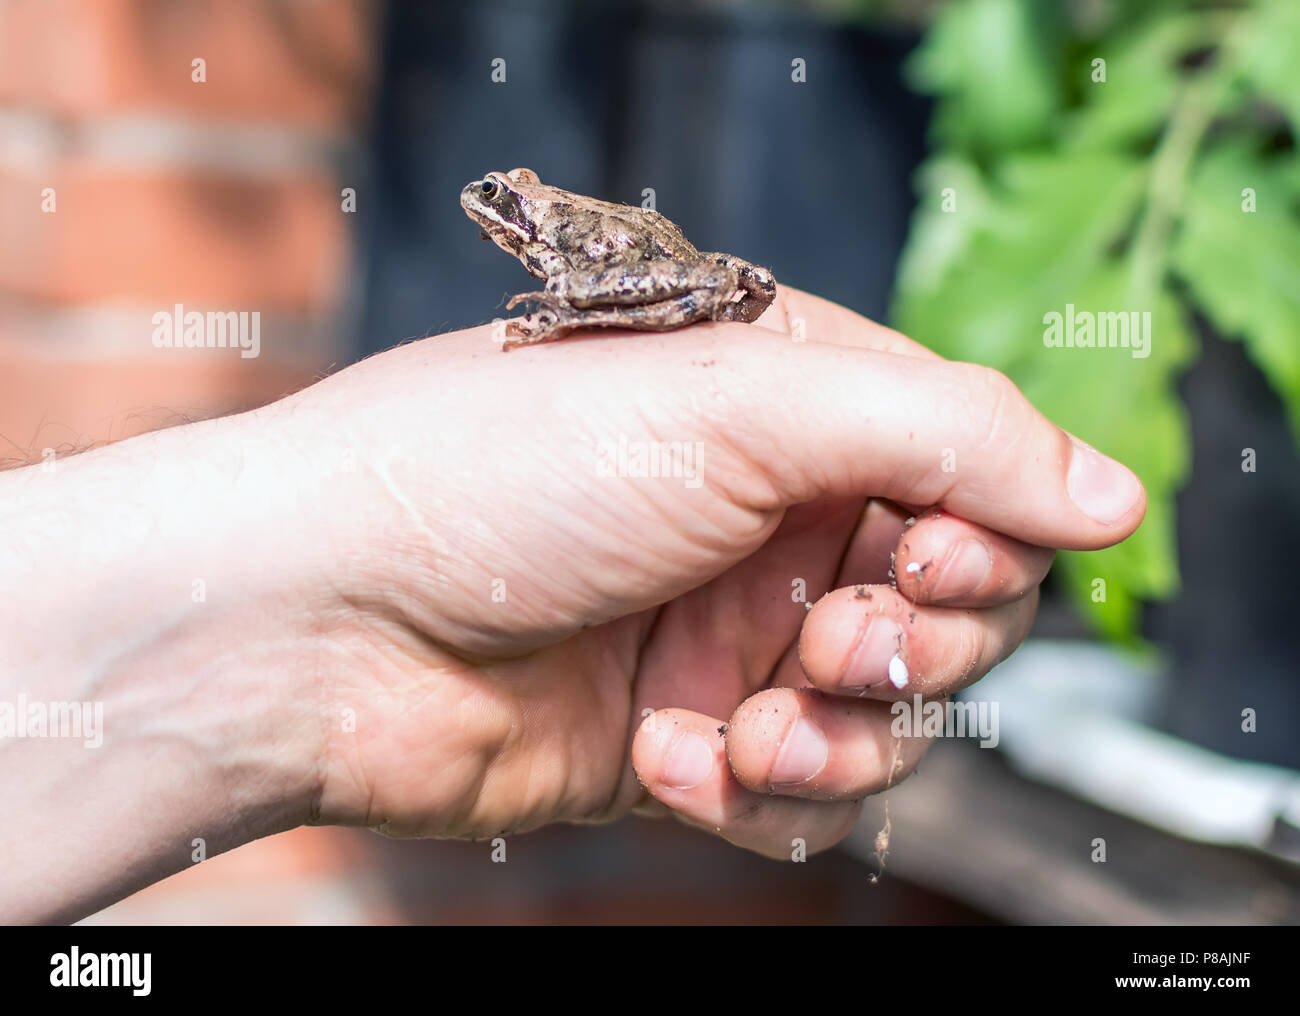 Slim, reddish-brown Moor frog (Rana arvalis) sitting on a man's hand. This semiaquatic amphibian is a member of the family Ranidae, or true frogs. Stock Photo